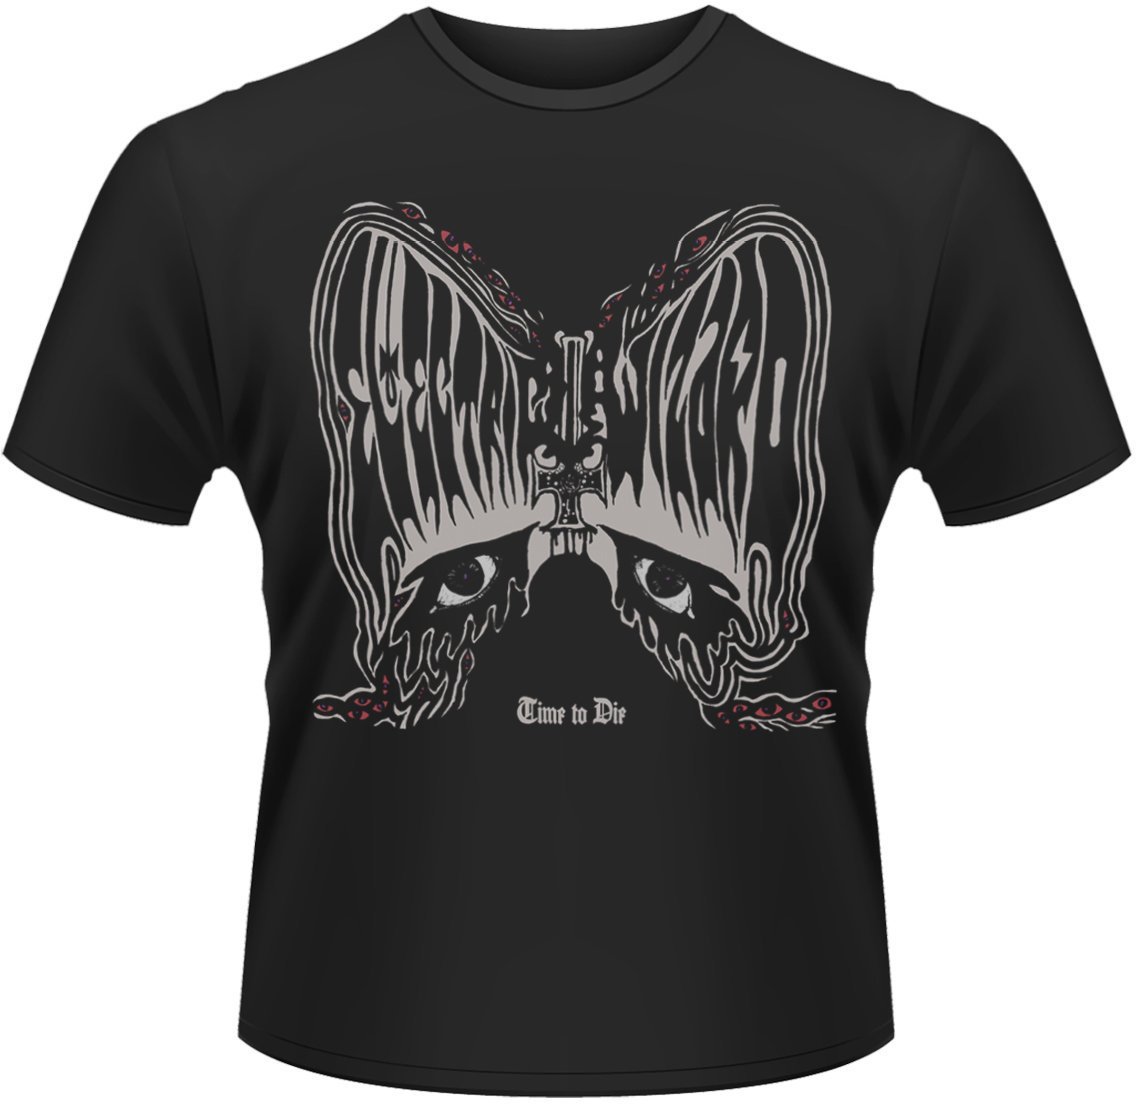 T-shirt Electric Wizard T-shirt Time To Die Masculino Black 2XL